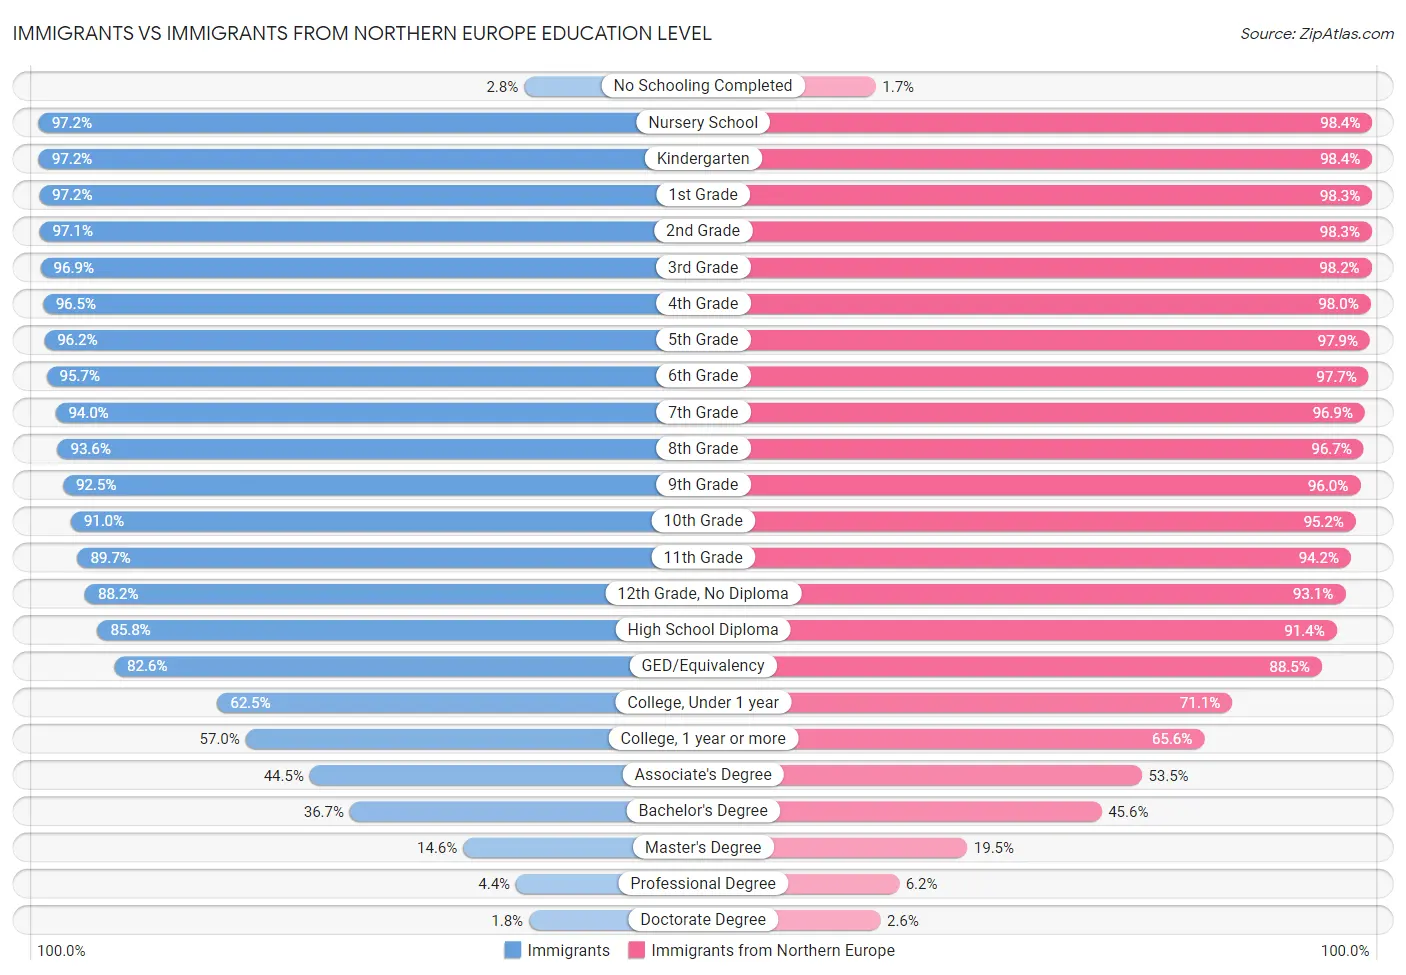 Immigrants vs Immigrants from Northern Europe Education Level